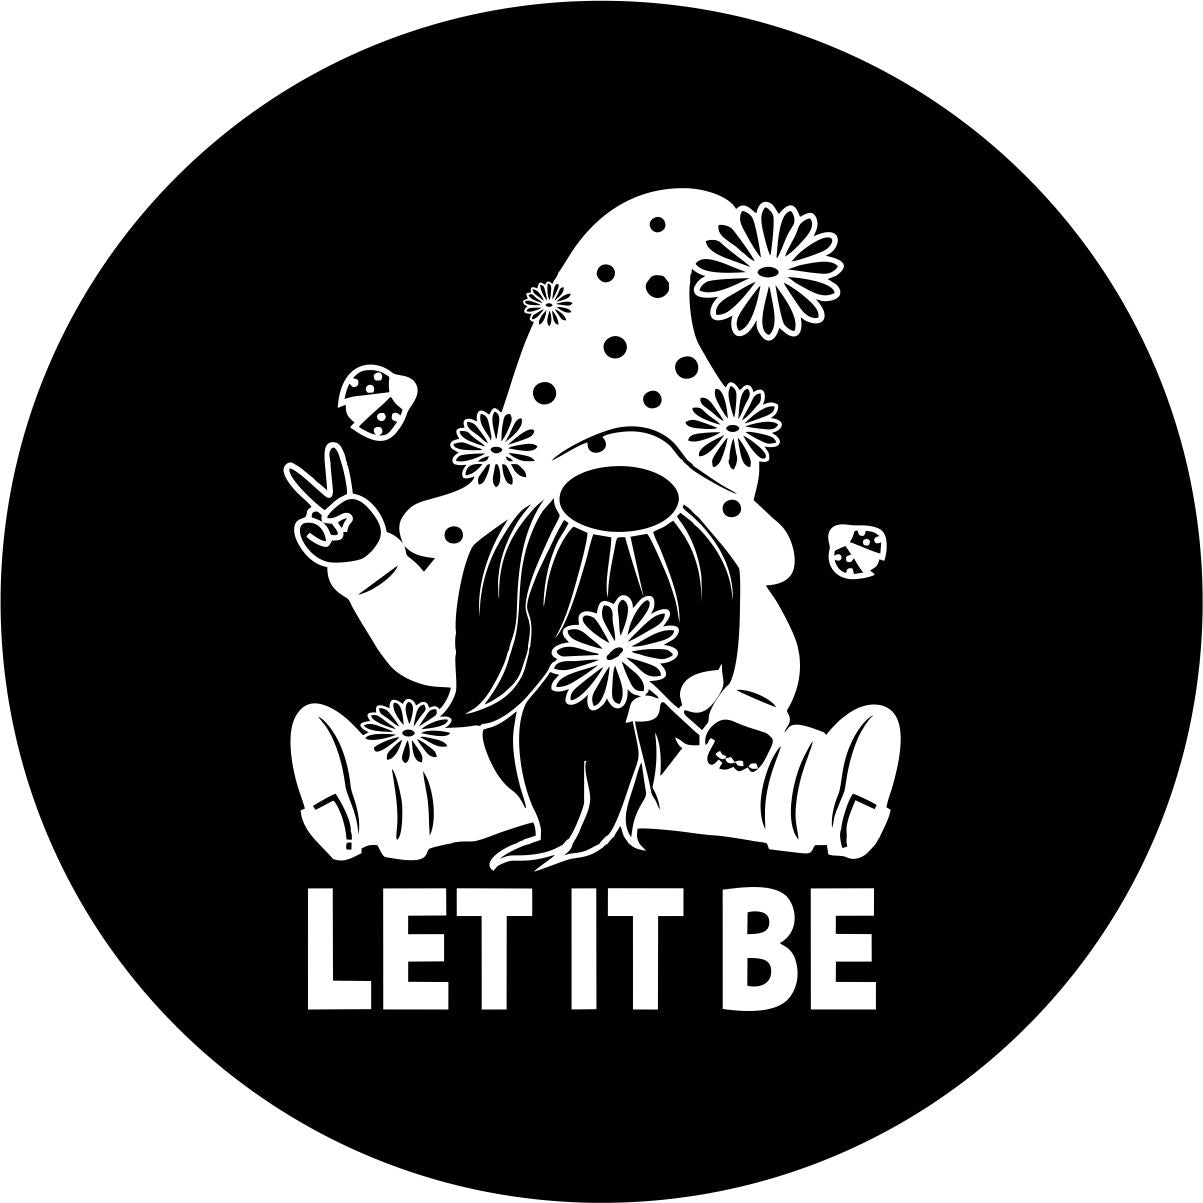 Black vinyl spare tire cover design of a white Scandinavian gnome sitting down with flowers and lady bugs giving a peace sign and the saying "let it be" below it. 